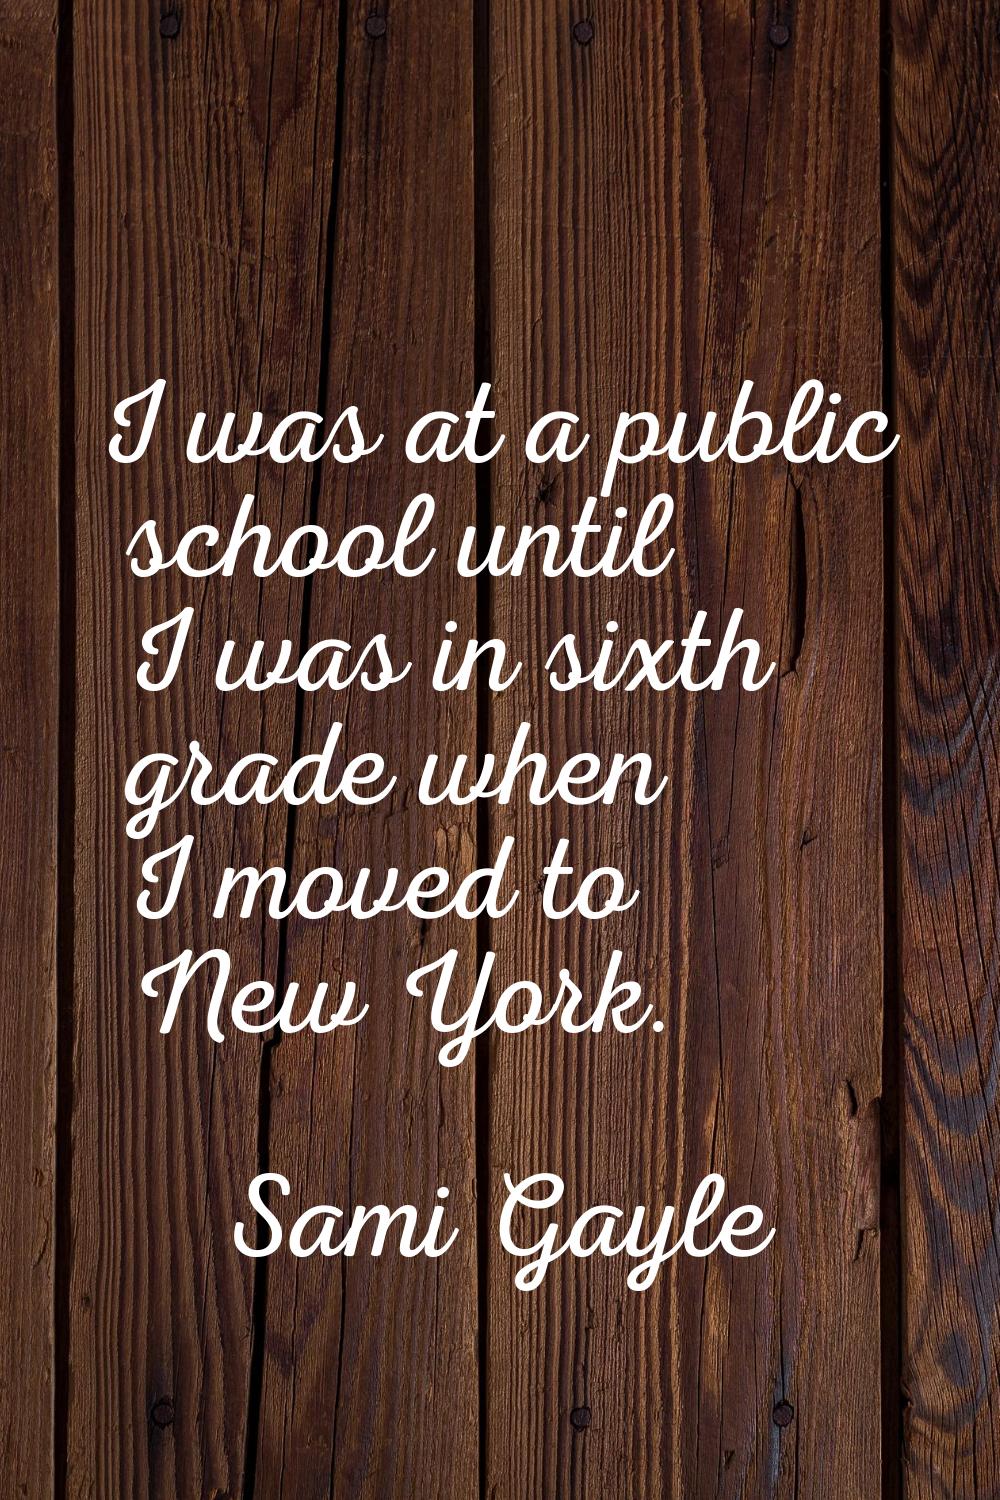 I was at a public school until I was in sixth grade when I moved to New York.